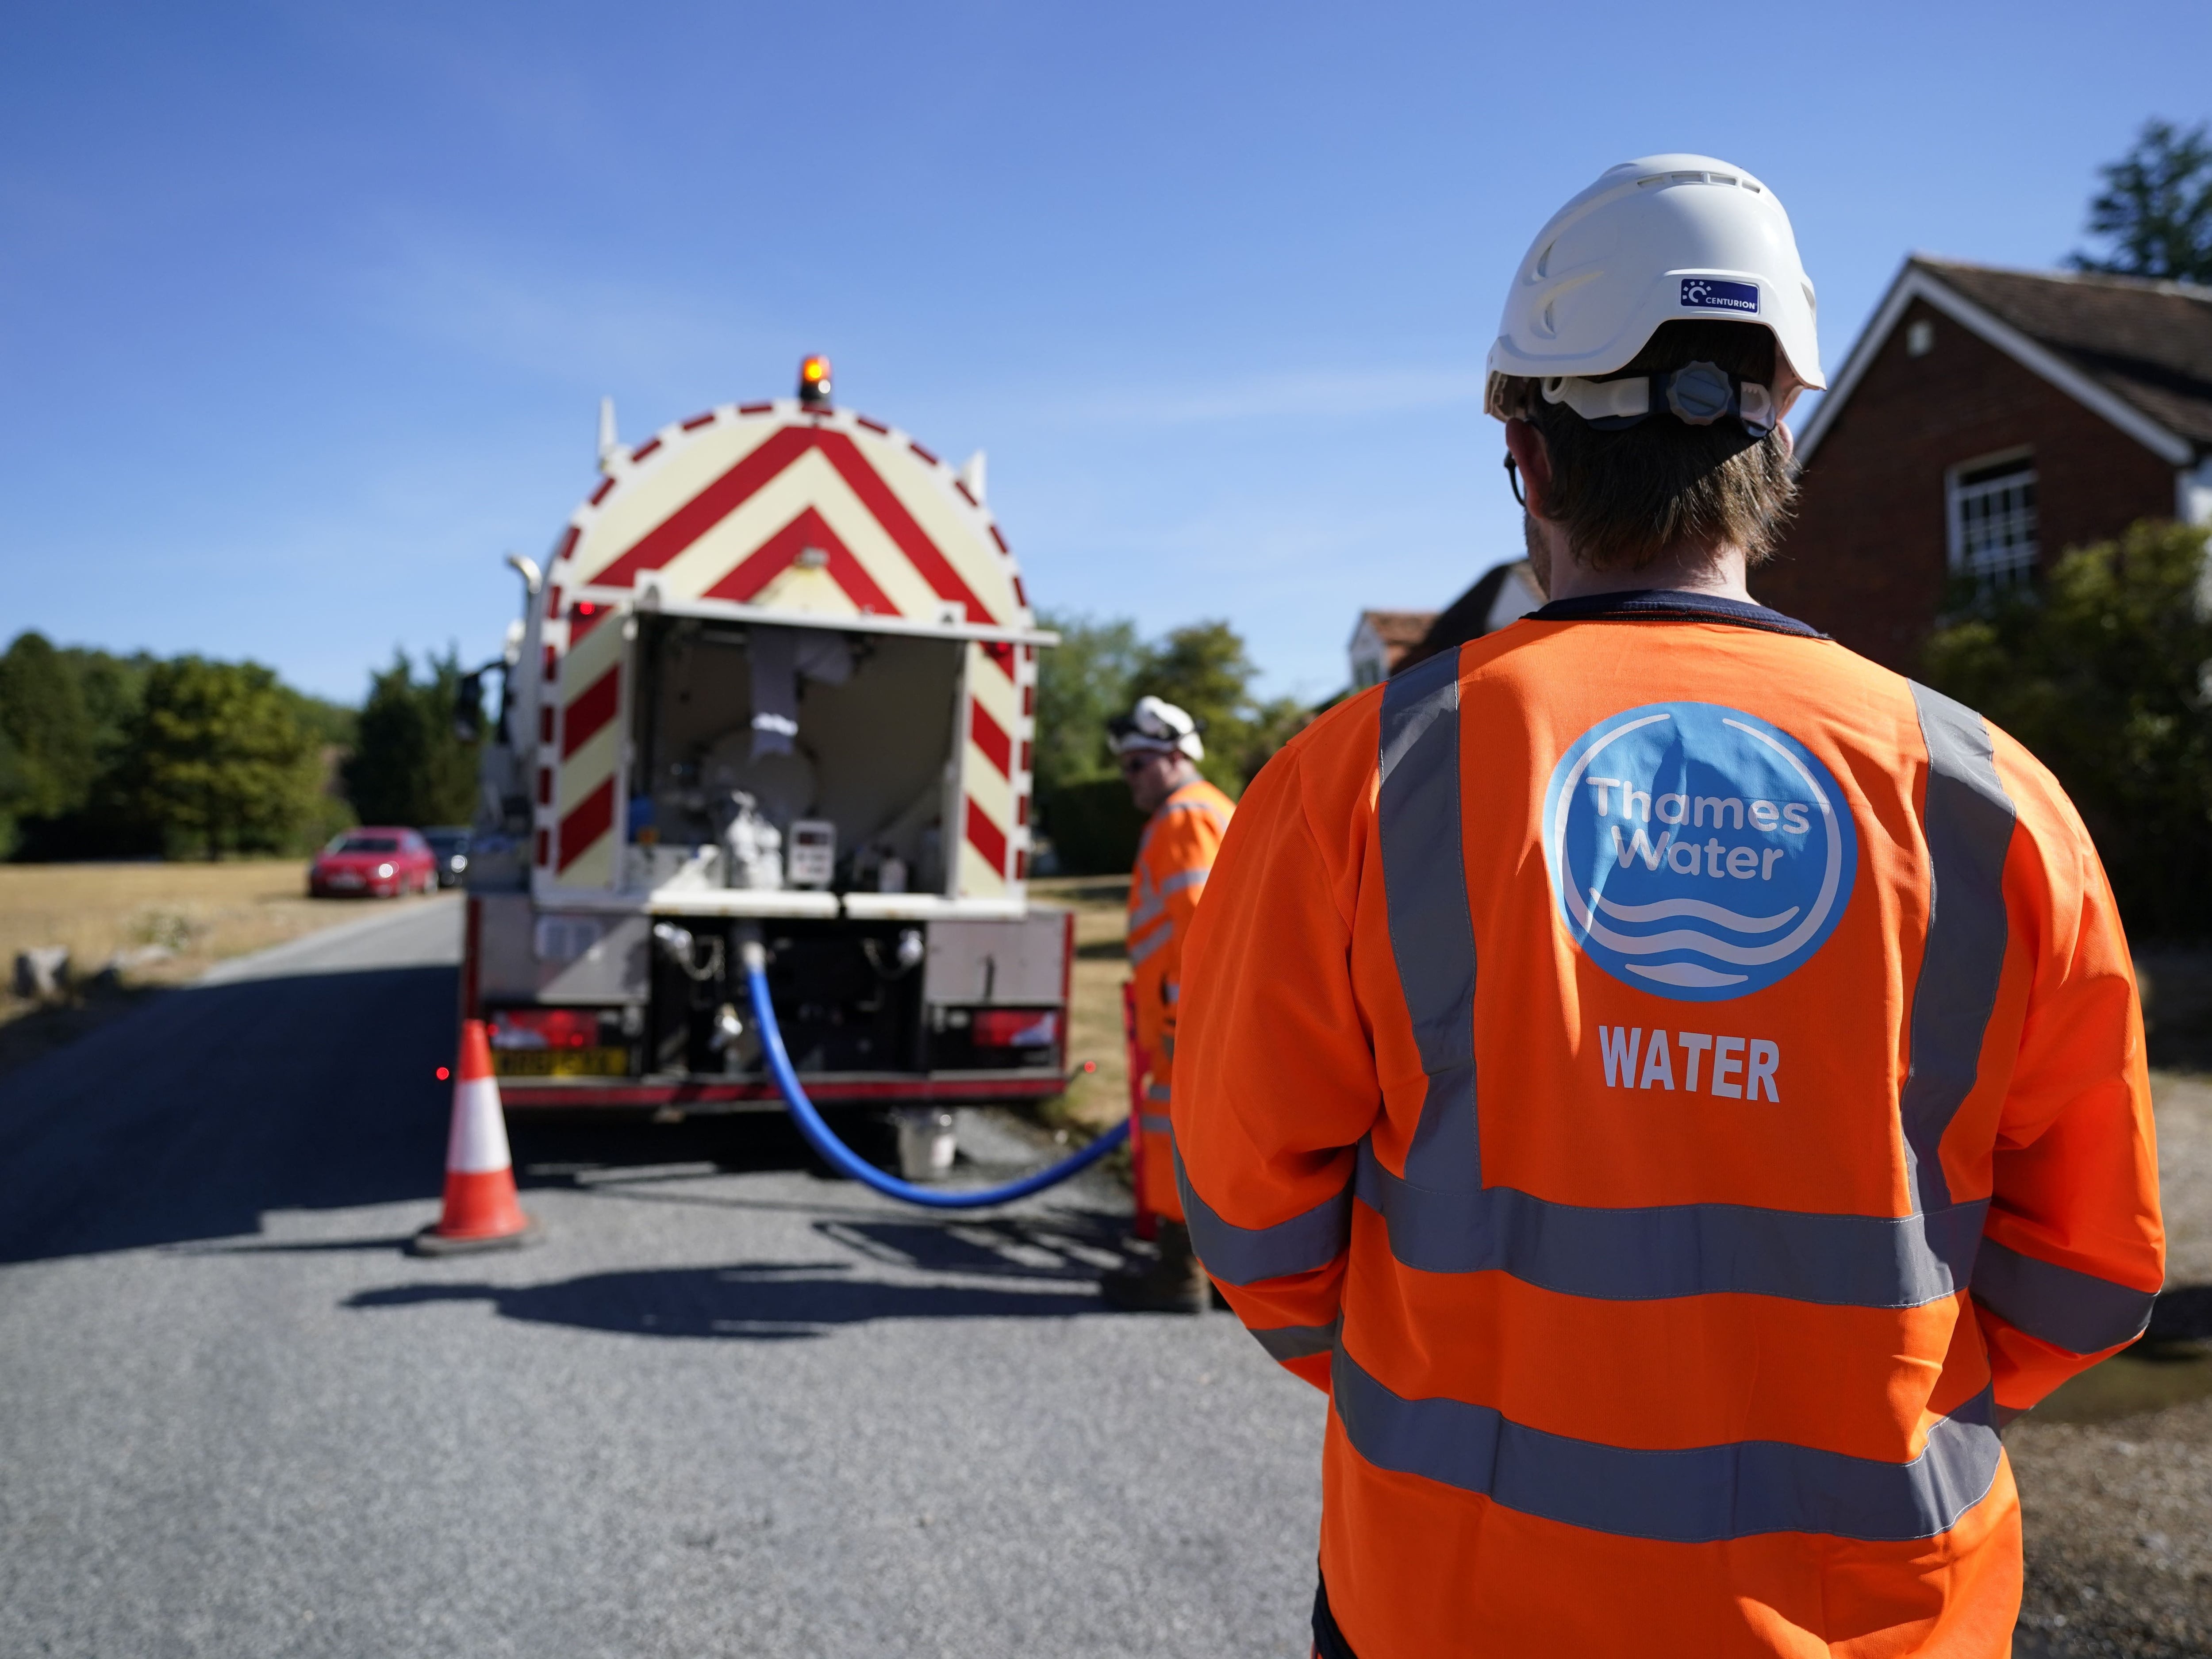 Thames Water’s credit rating downgraded to ‘junk’ status